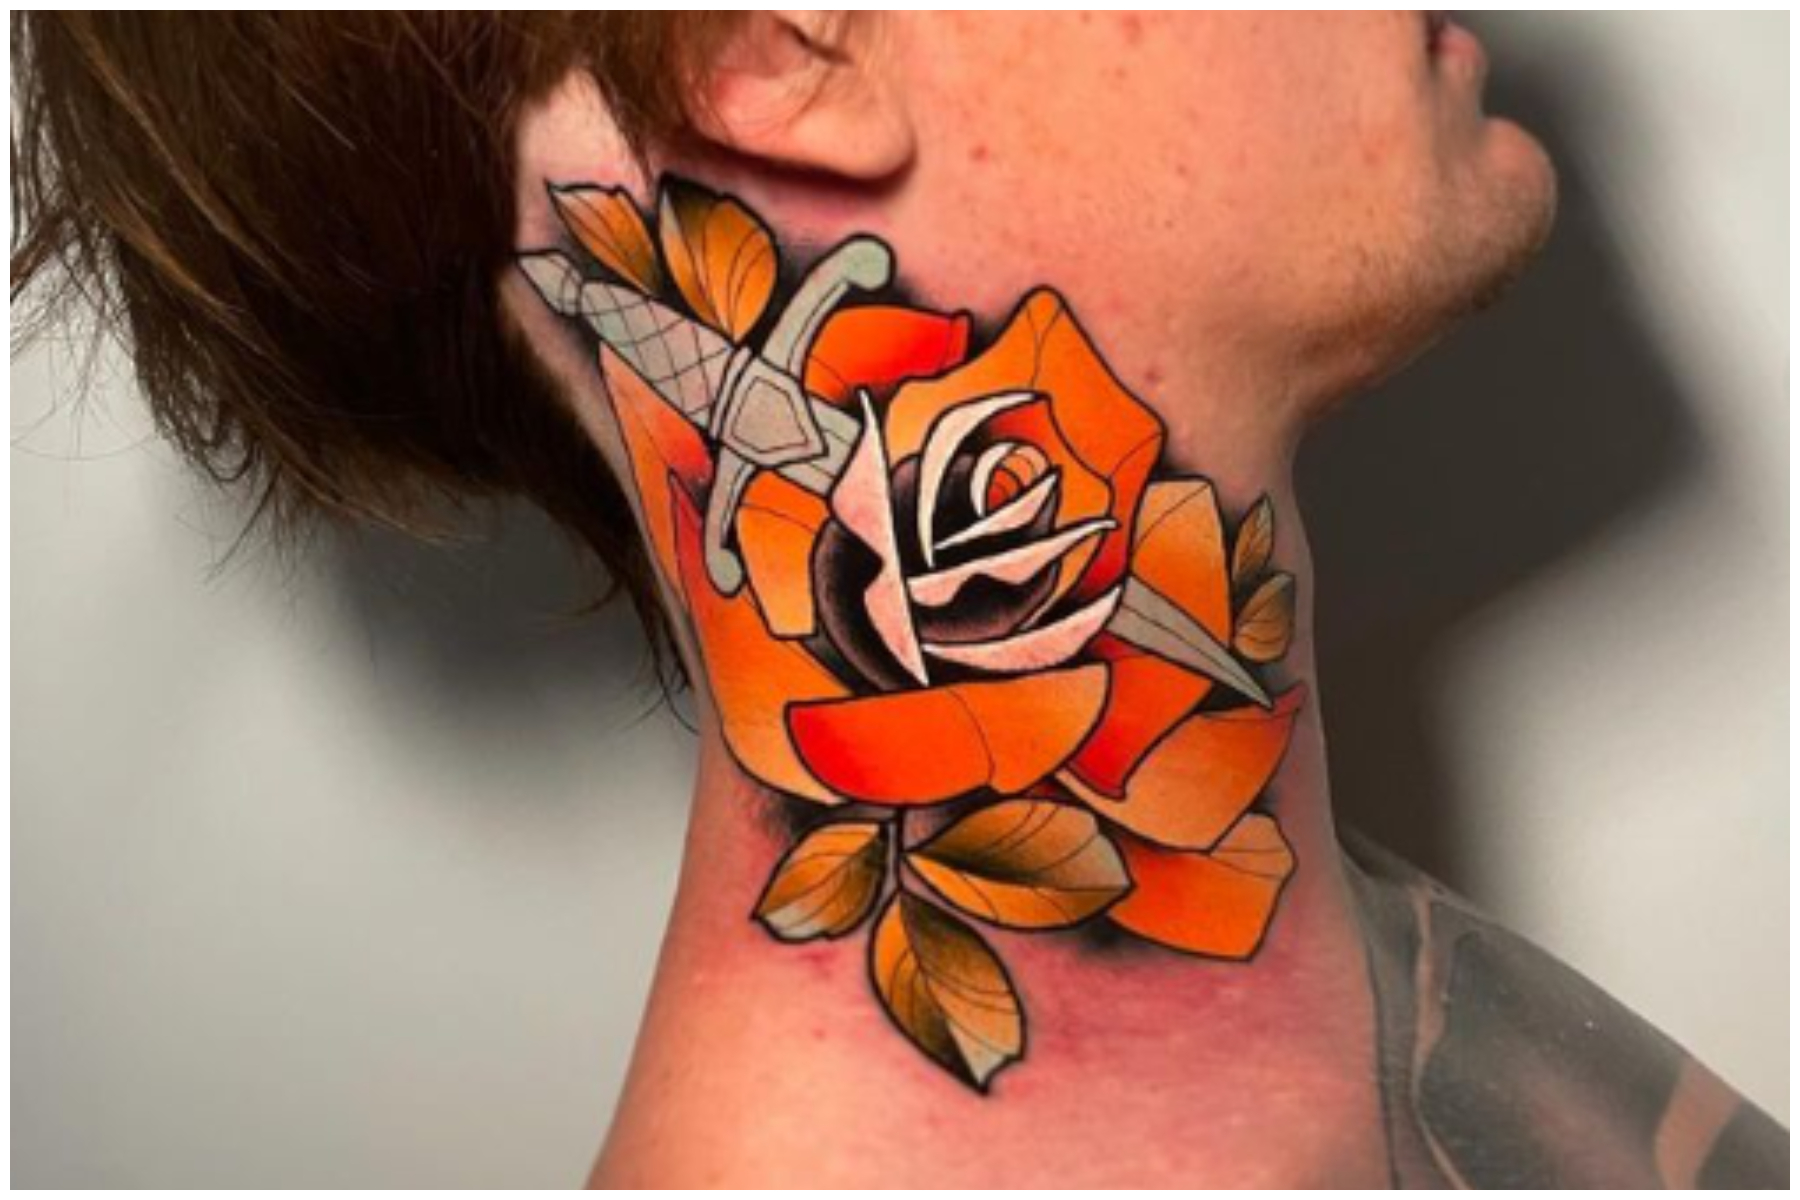 101 Best Floral Neck Tattoo Ideas That Will Blow Your Mind!